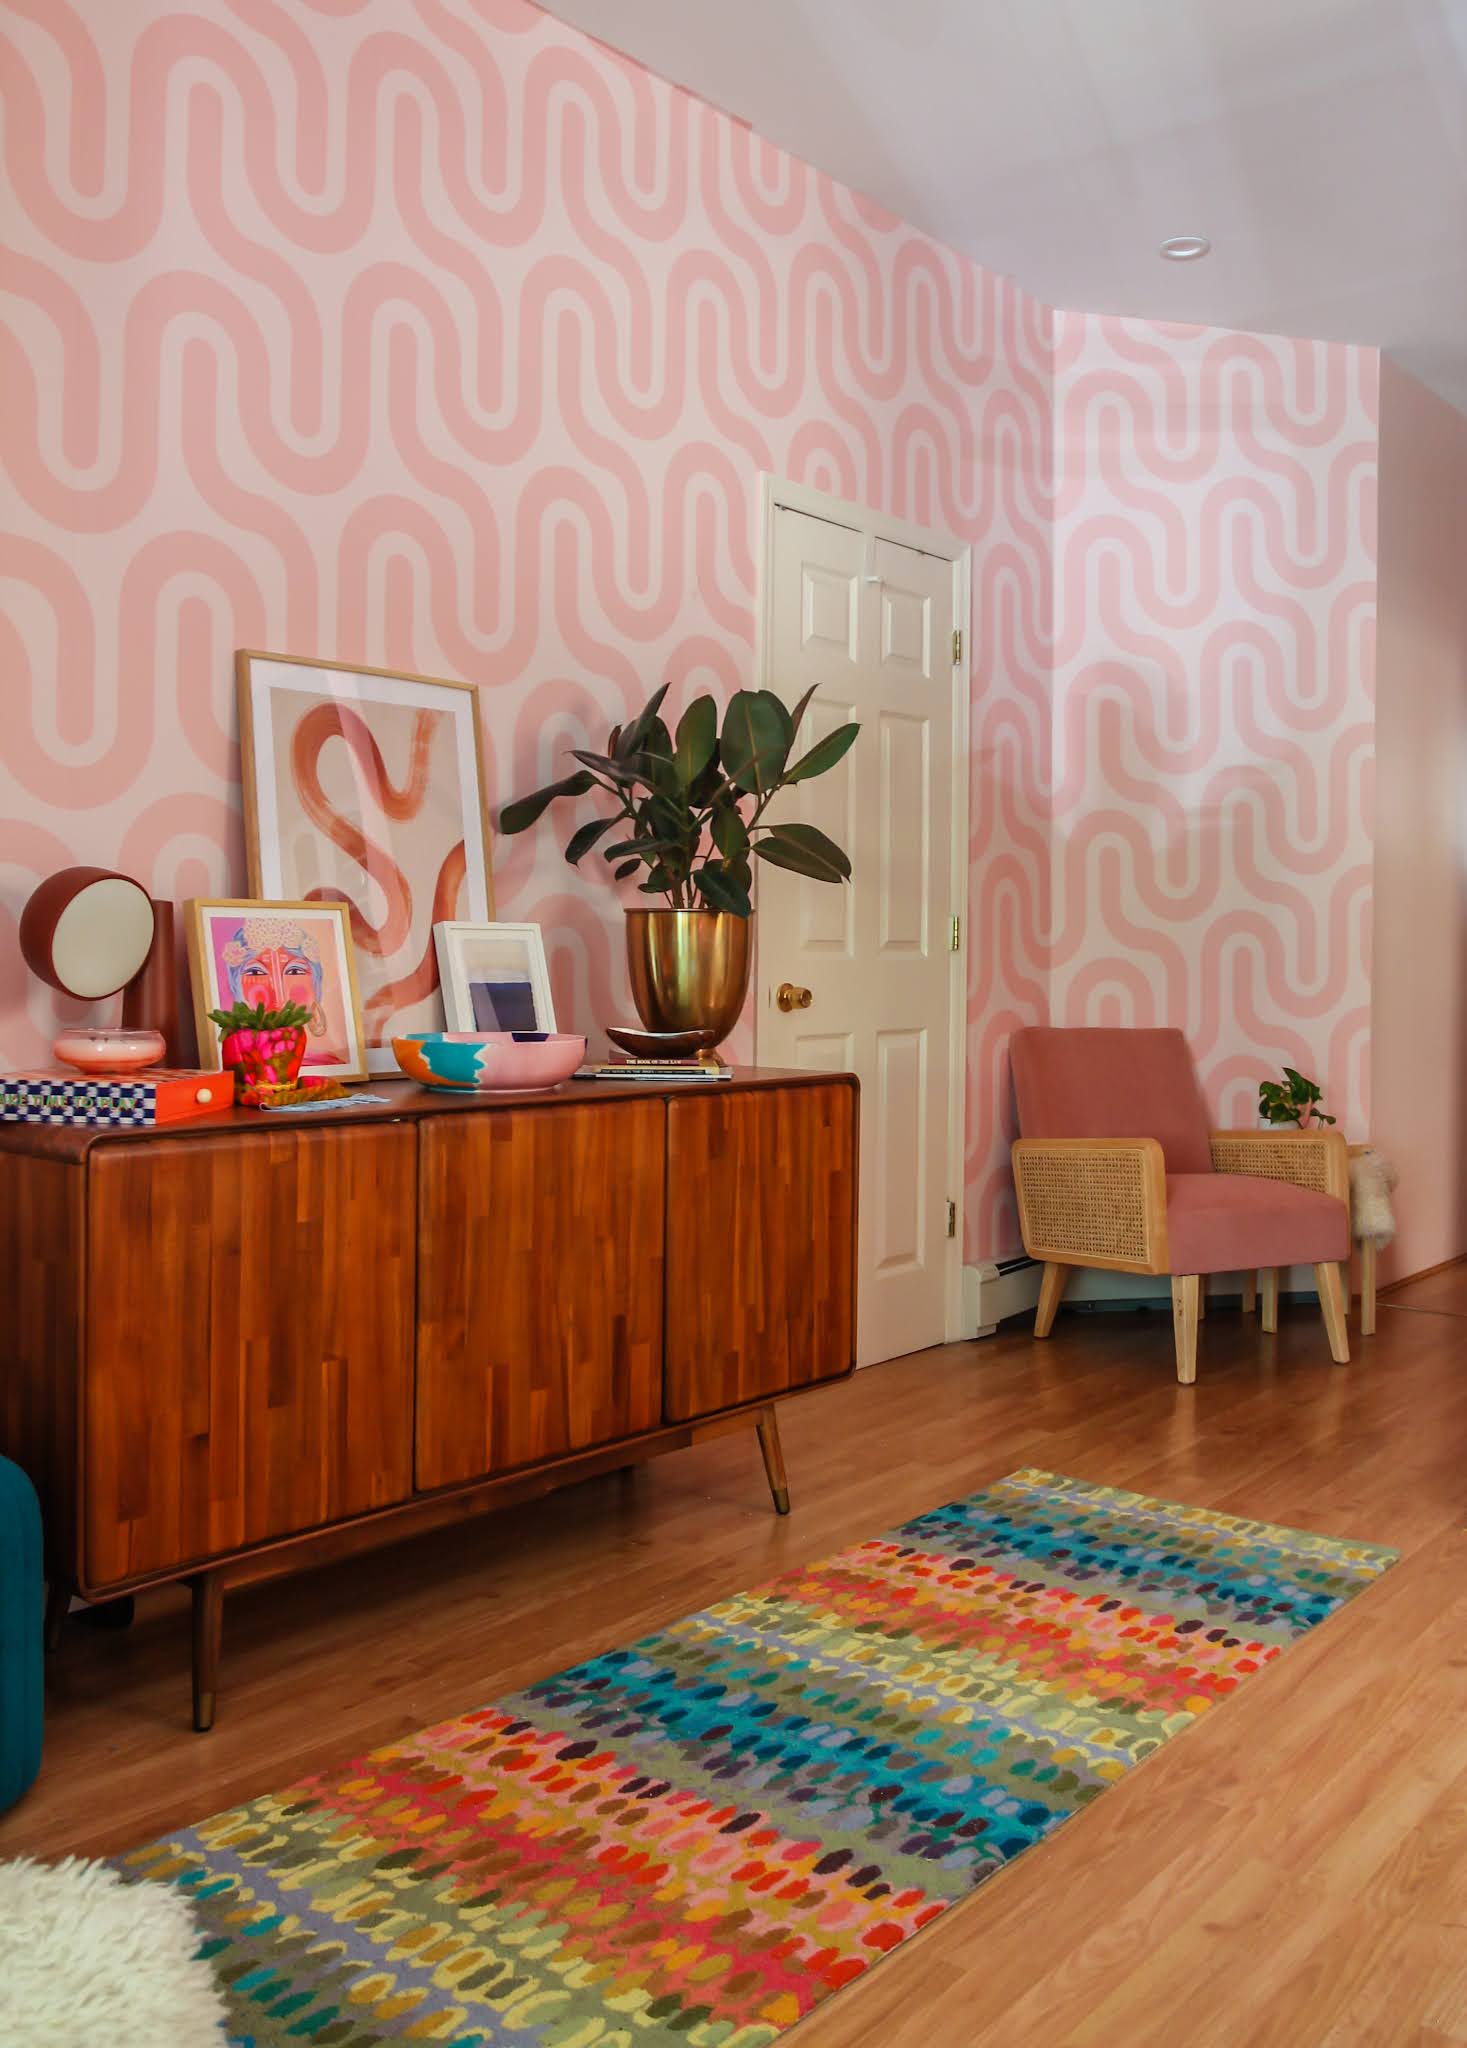 wallpaper ideas // colorful homes // maximalist home decor // pink home decor // retro home decor // retro wallpaper ideas // entryway decor // entryway ideas // small space decor ideas // maximalist homes